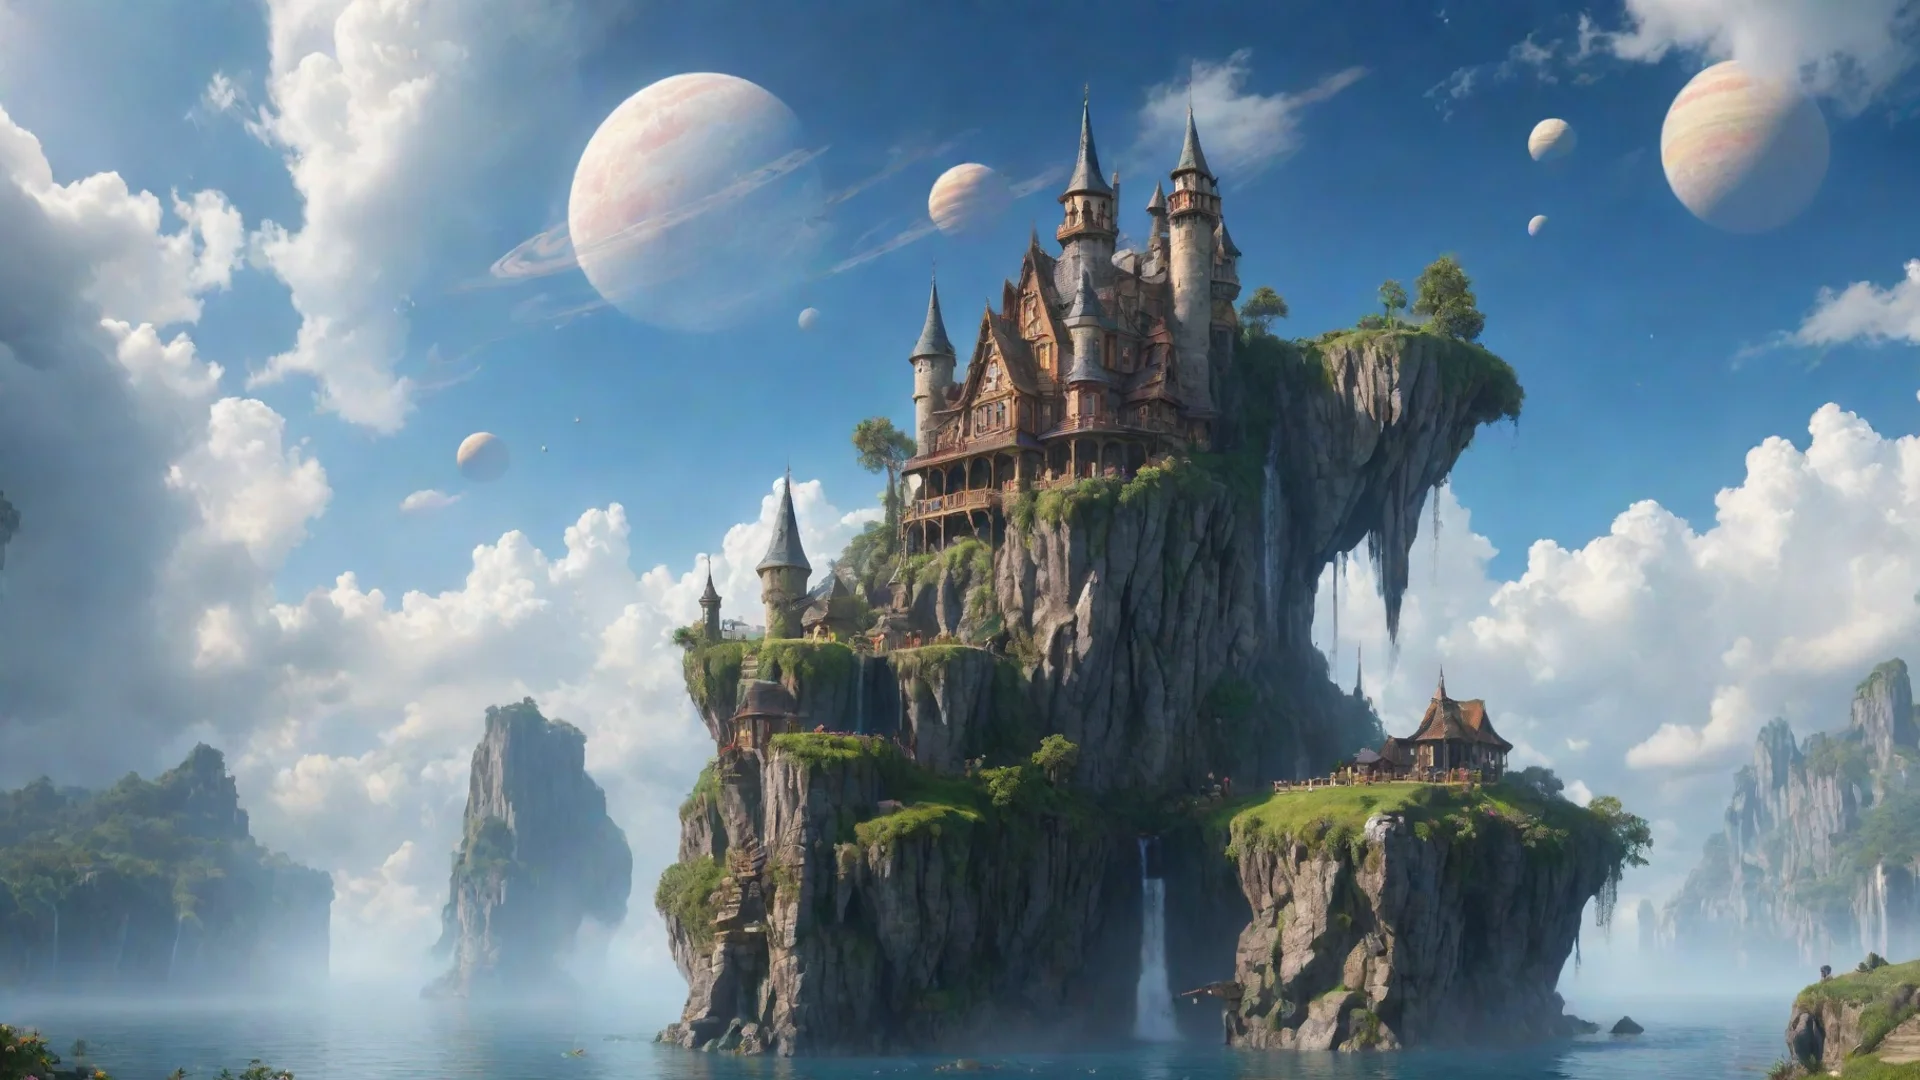 amazing peaceful cottage in sky epic floating castle on floating cliffs with waterfalls down beautiful sky with saturn planets awesome portrait 2 wide